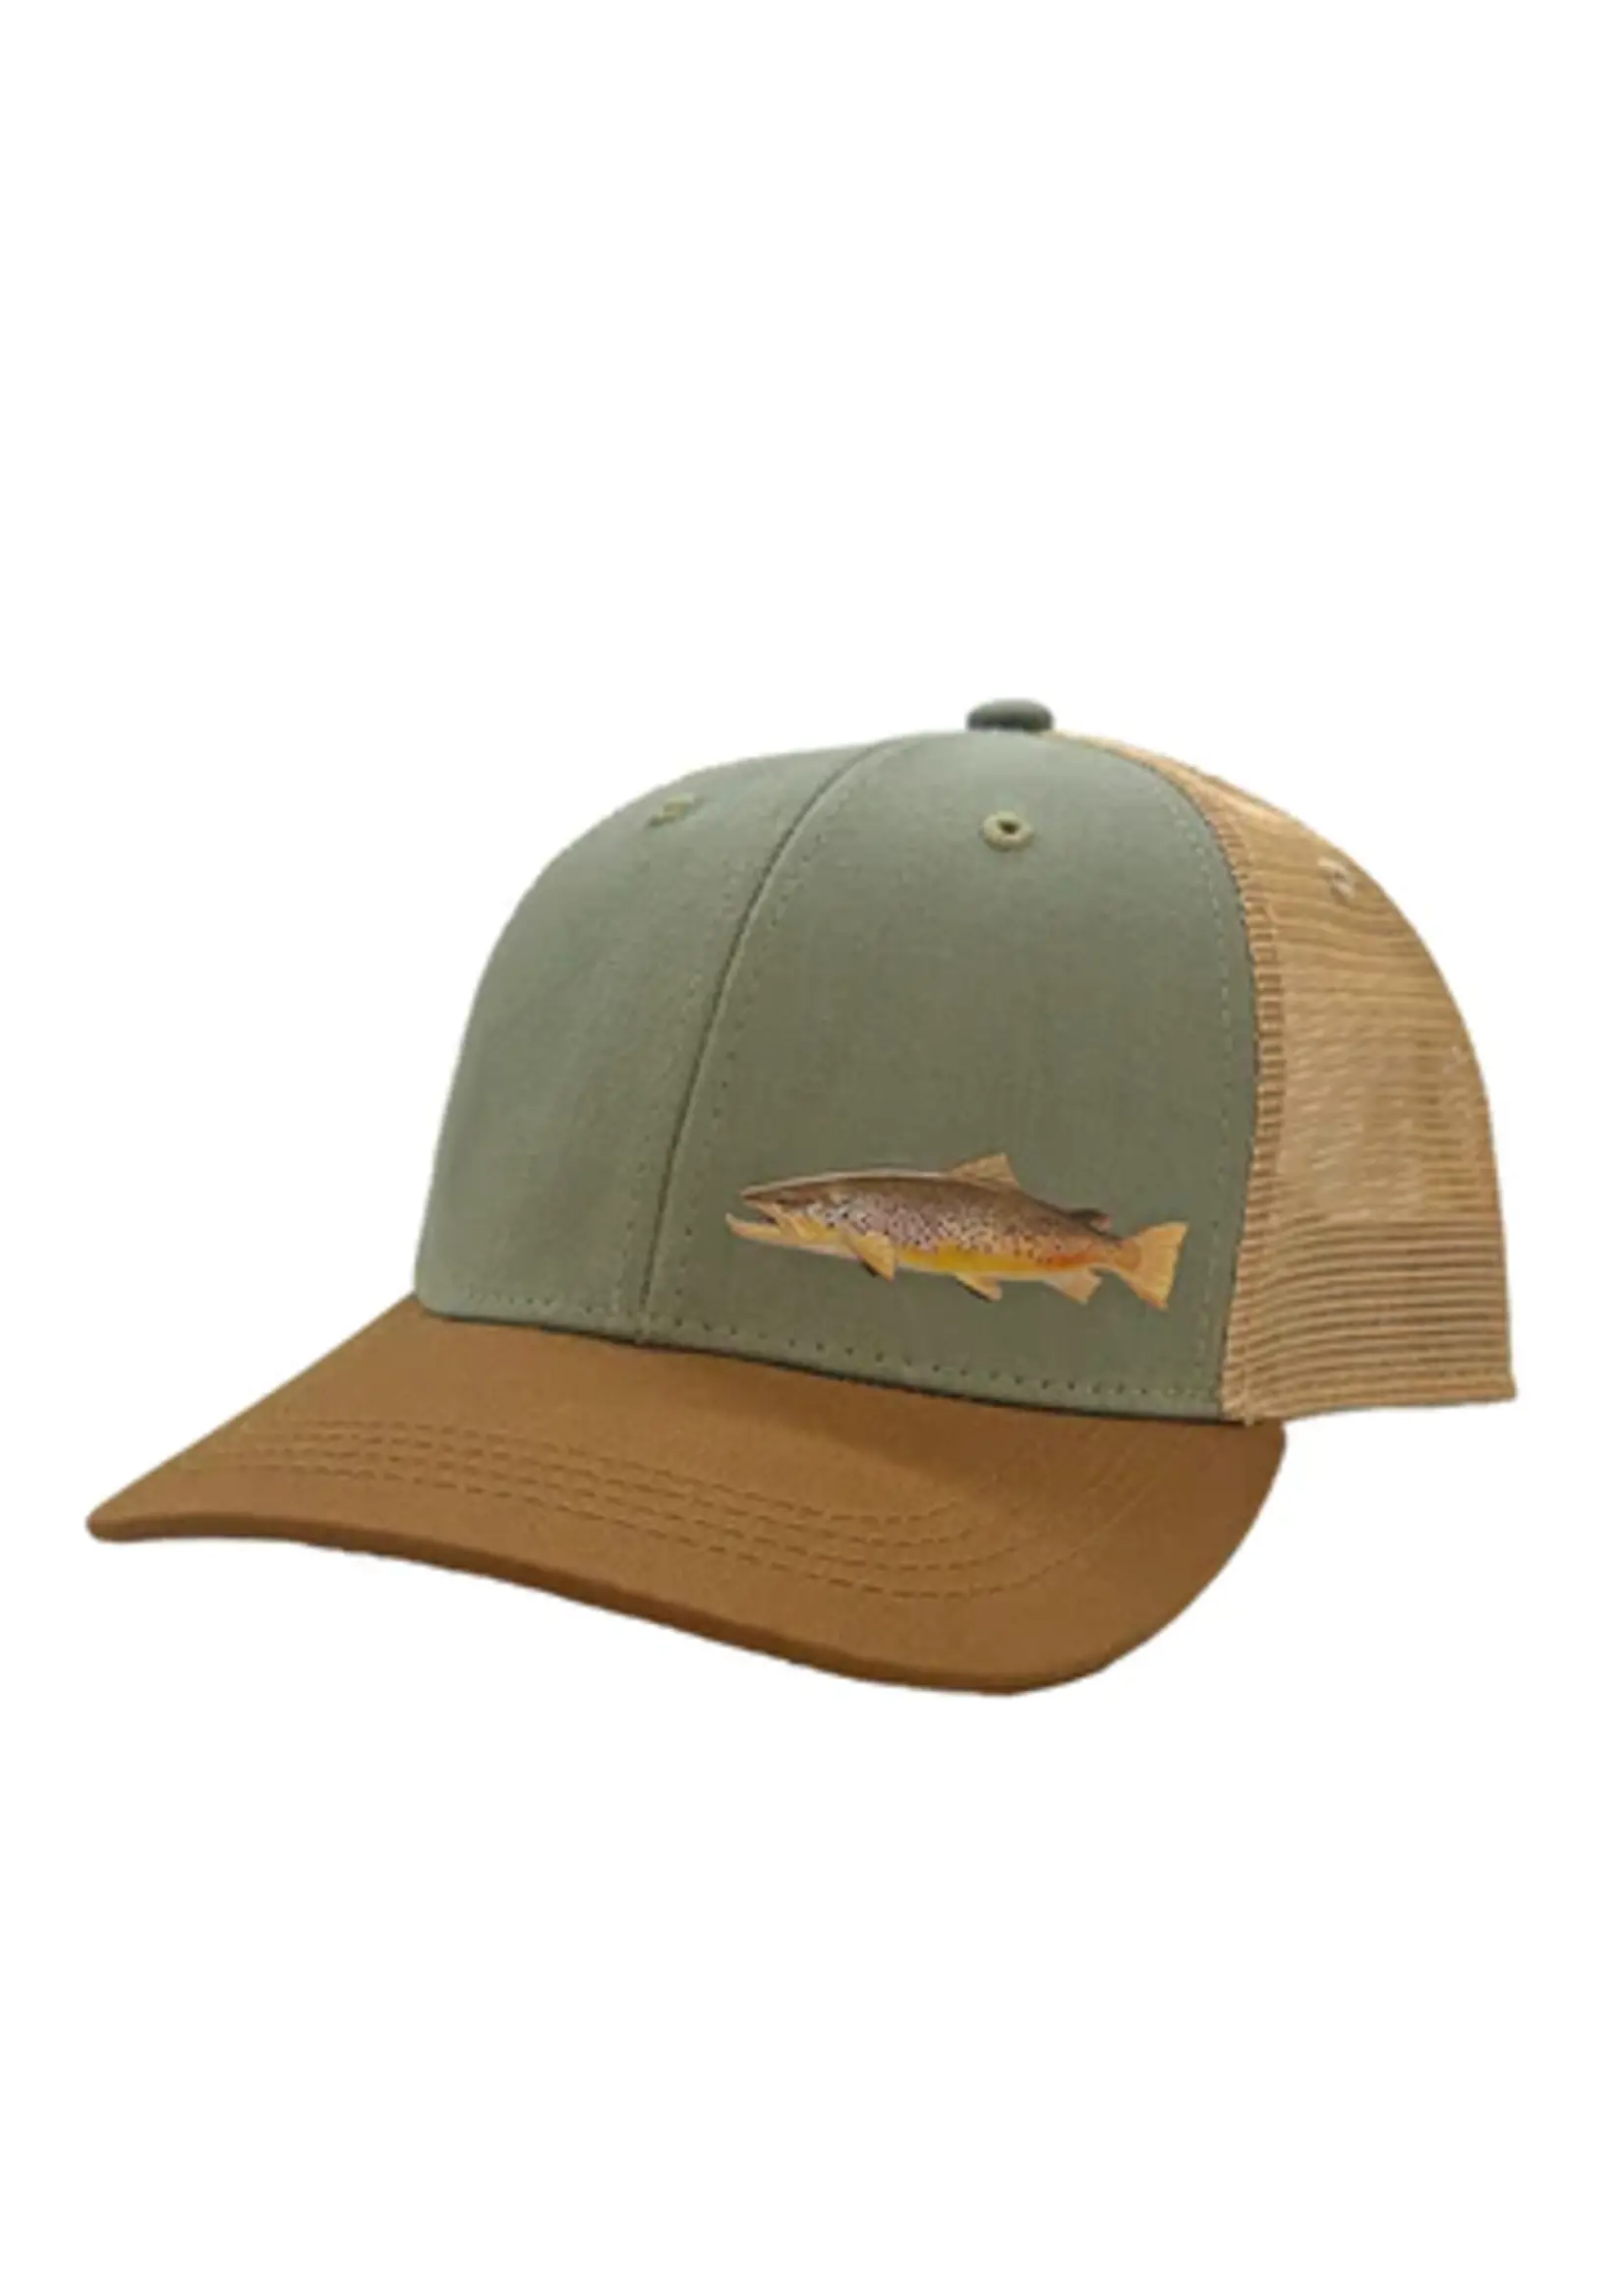 Rep Your Water RepYourWater Tailout Series: Brown Hat